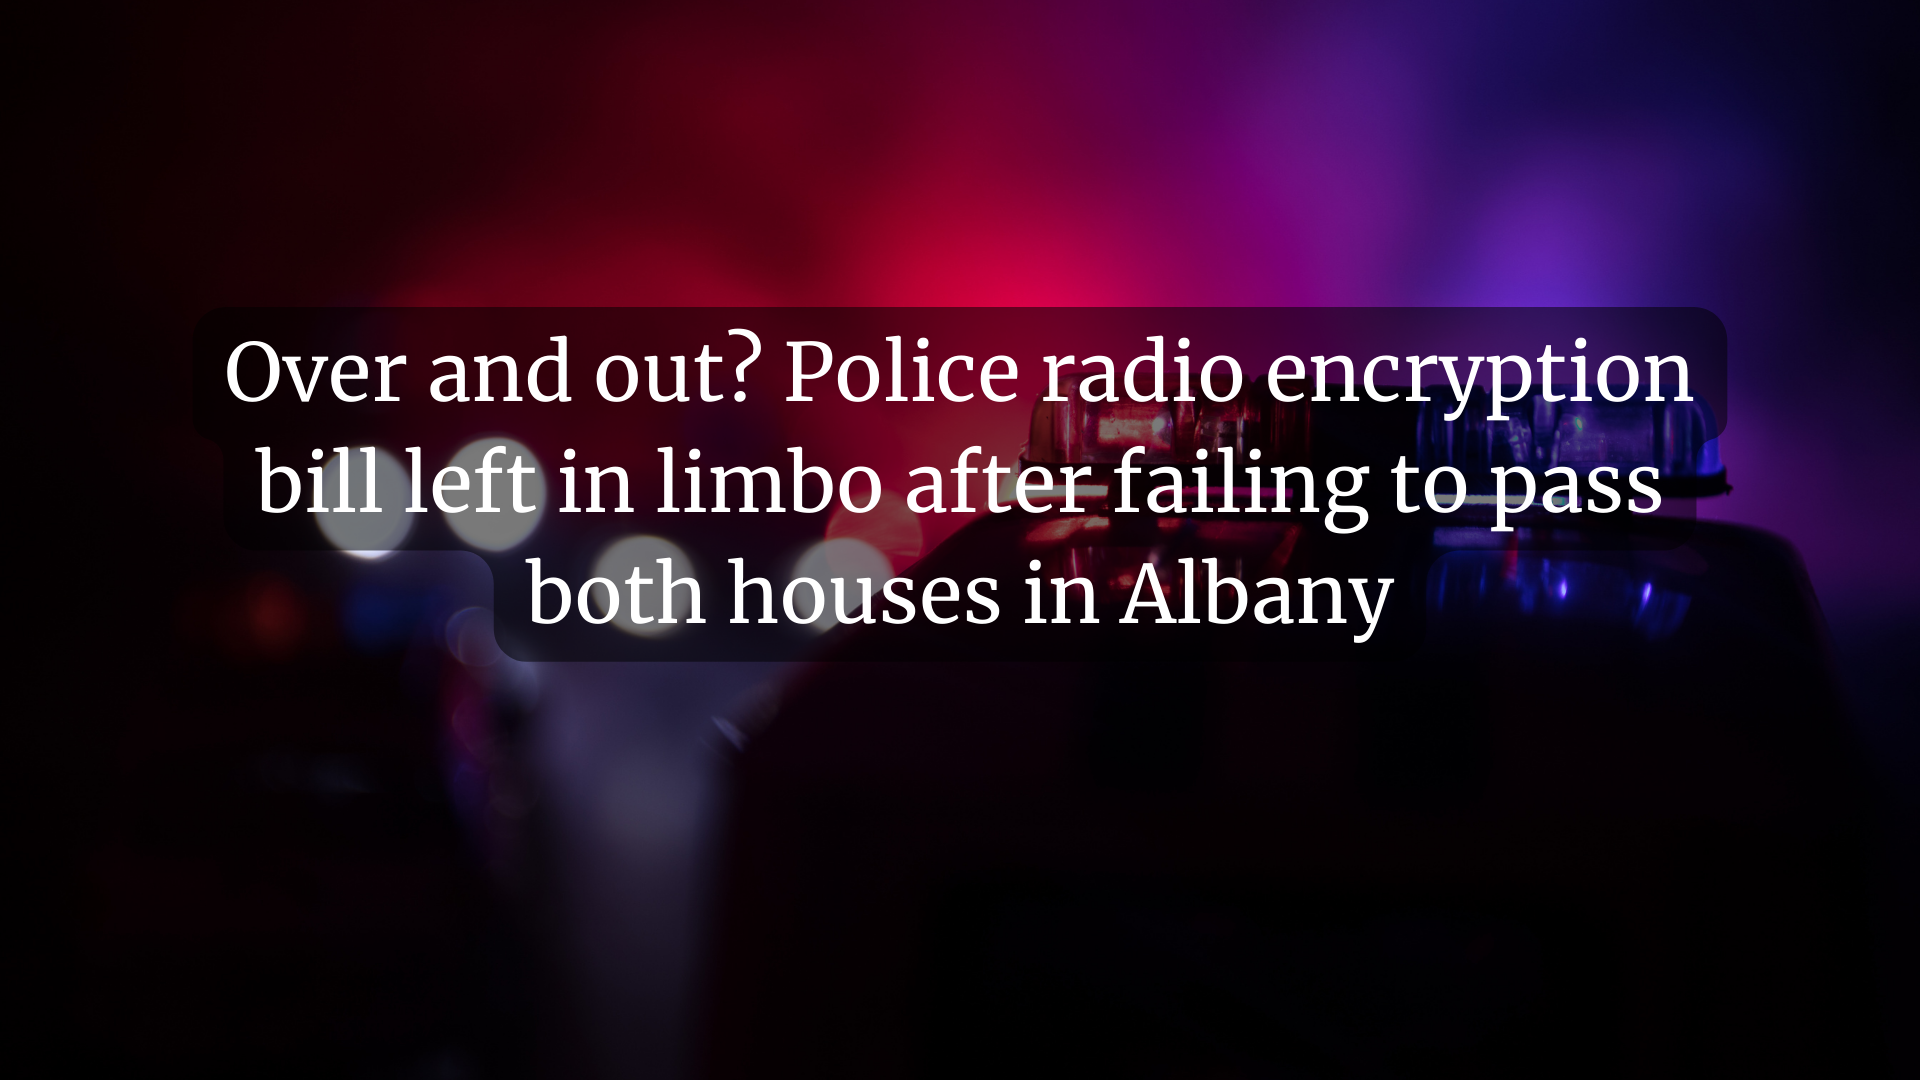 Over and out? Police radio encryption bill left in limbo after failing to pass both houses in Albany